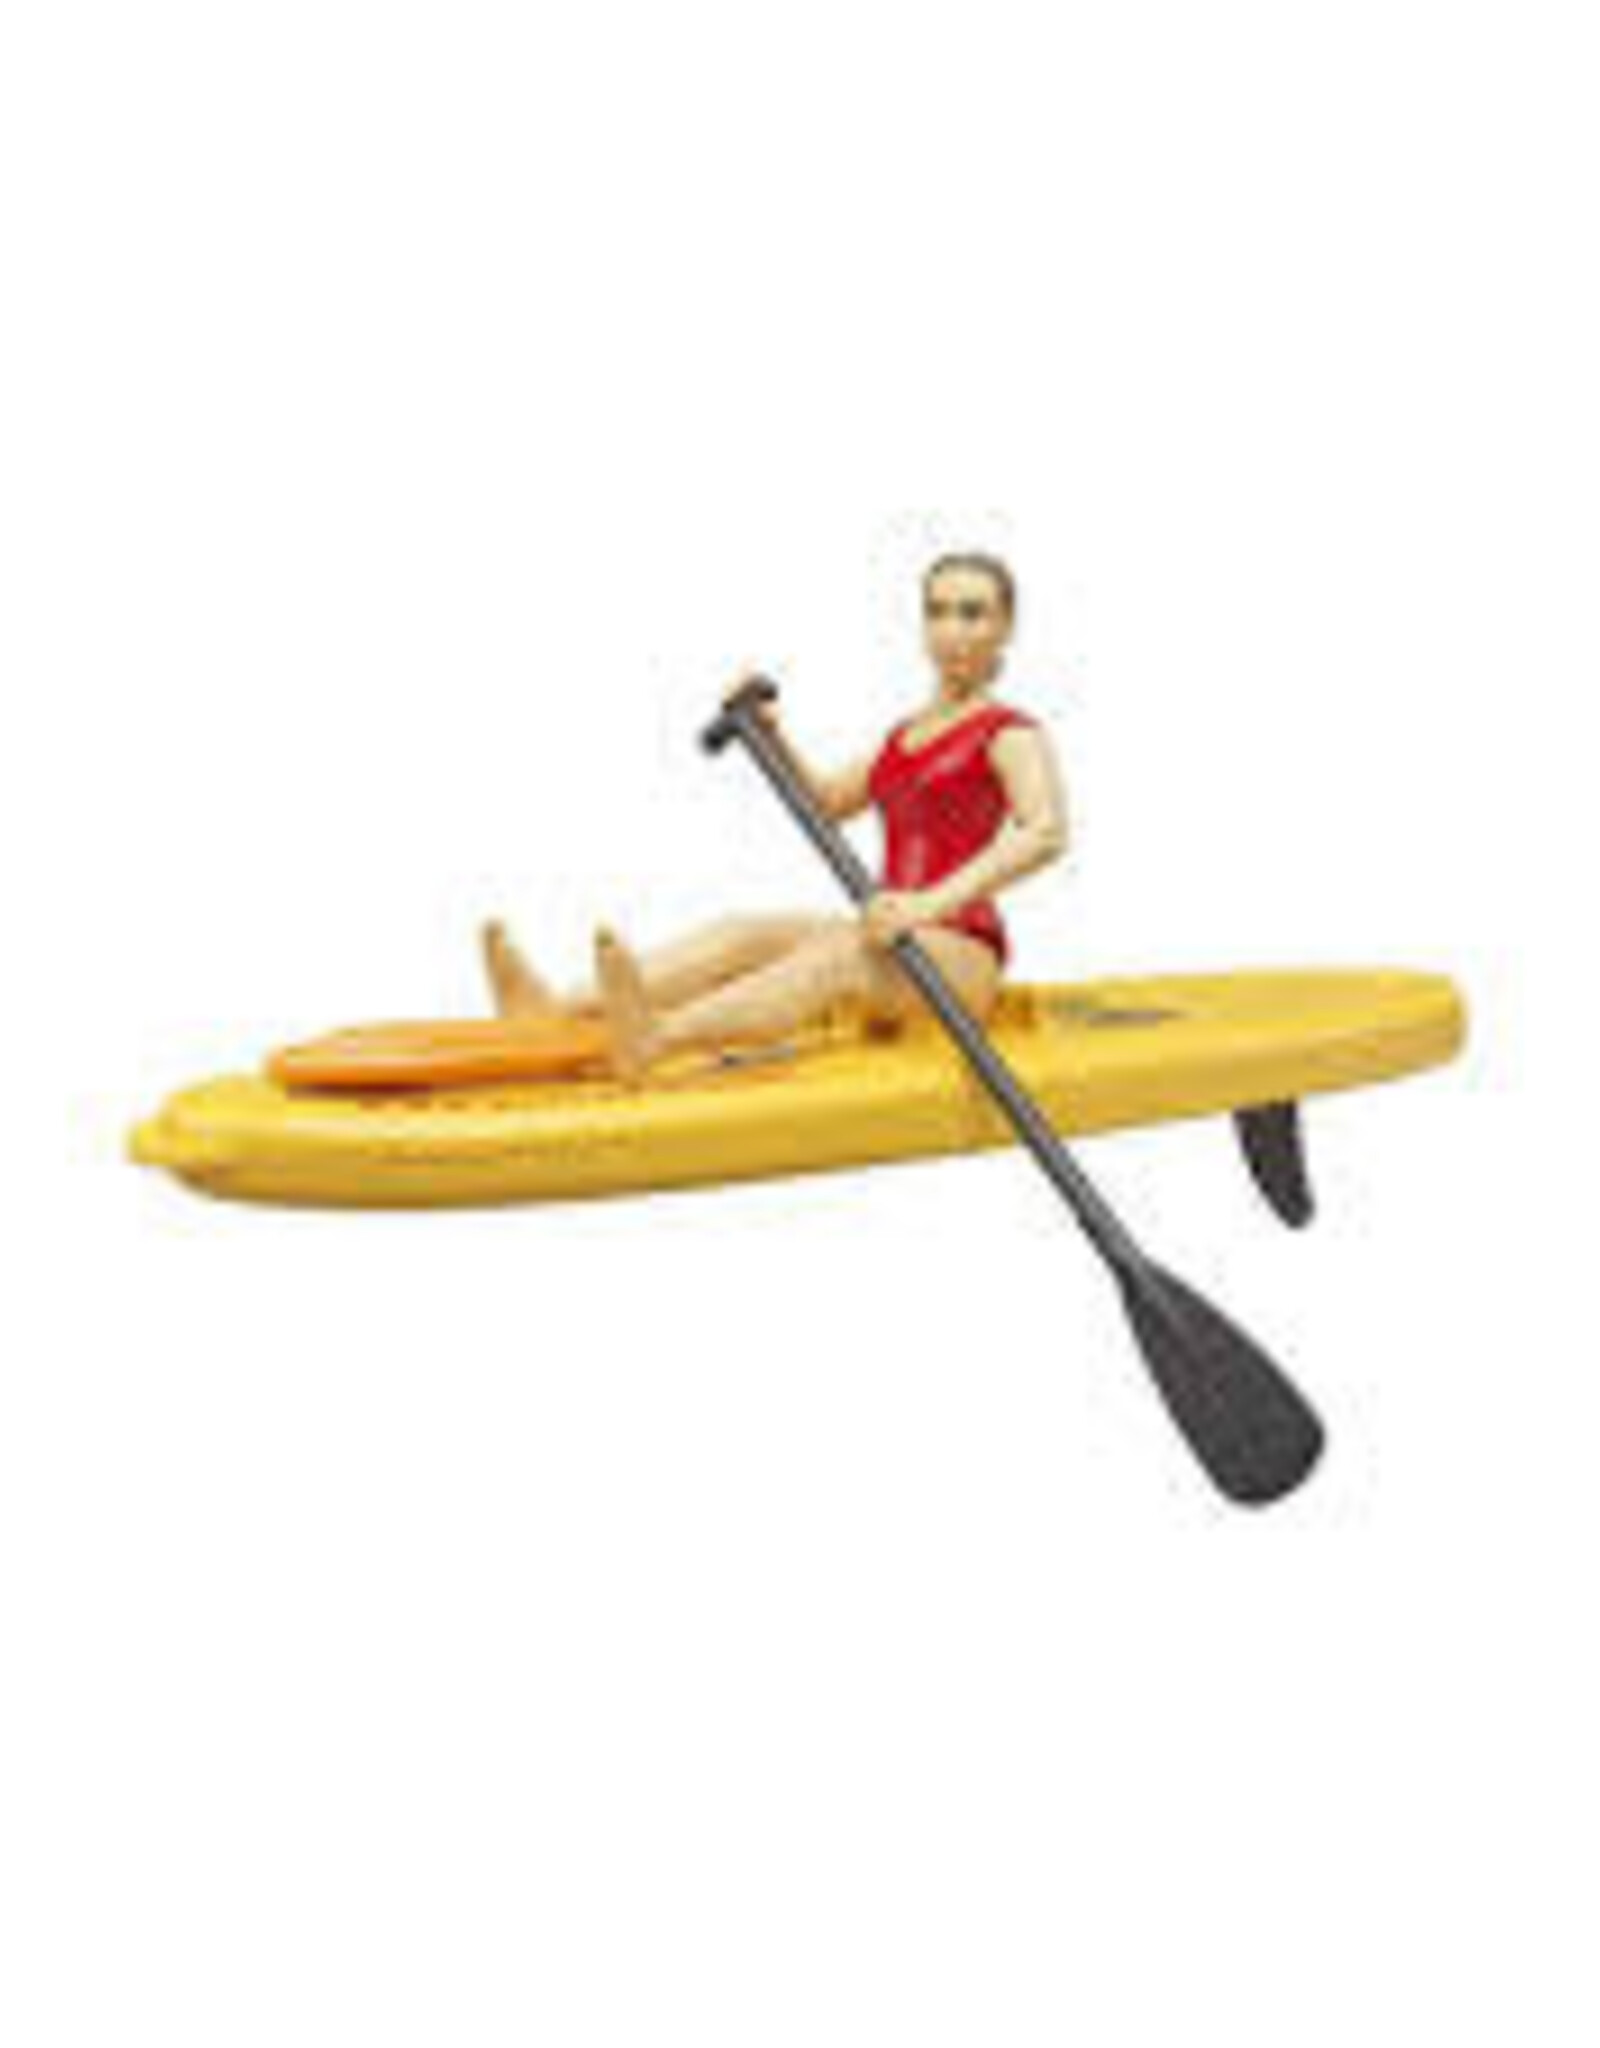 Bruder Bruder Lifeguard with Stand Up Paddle board